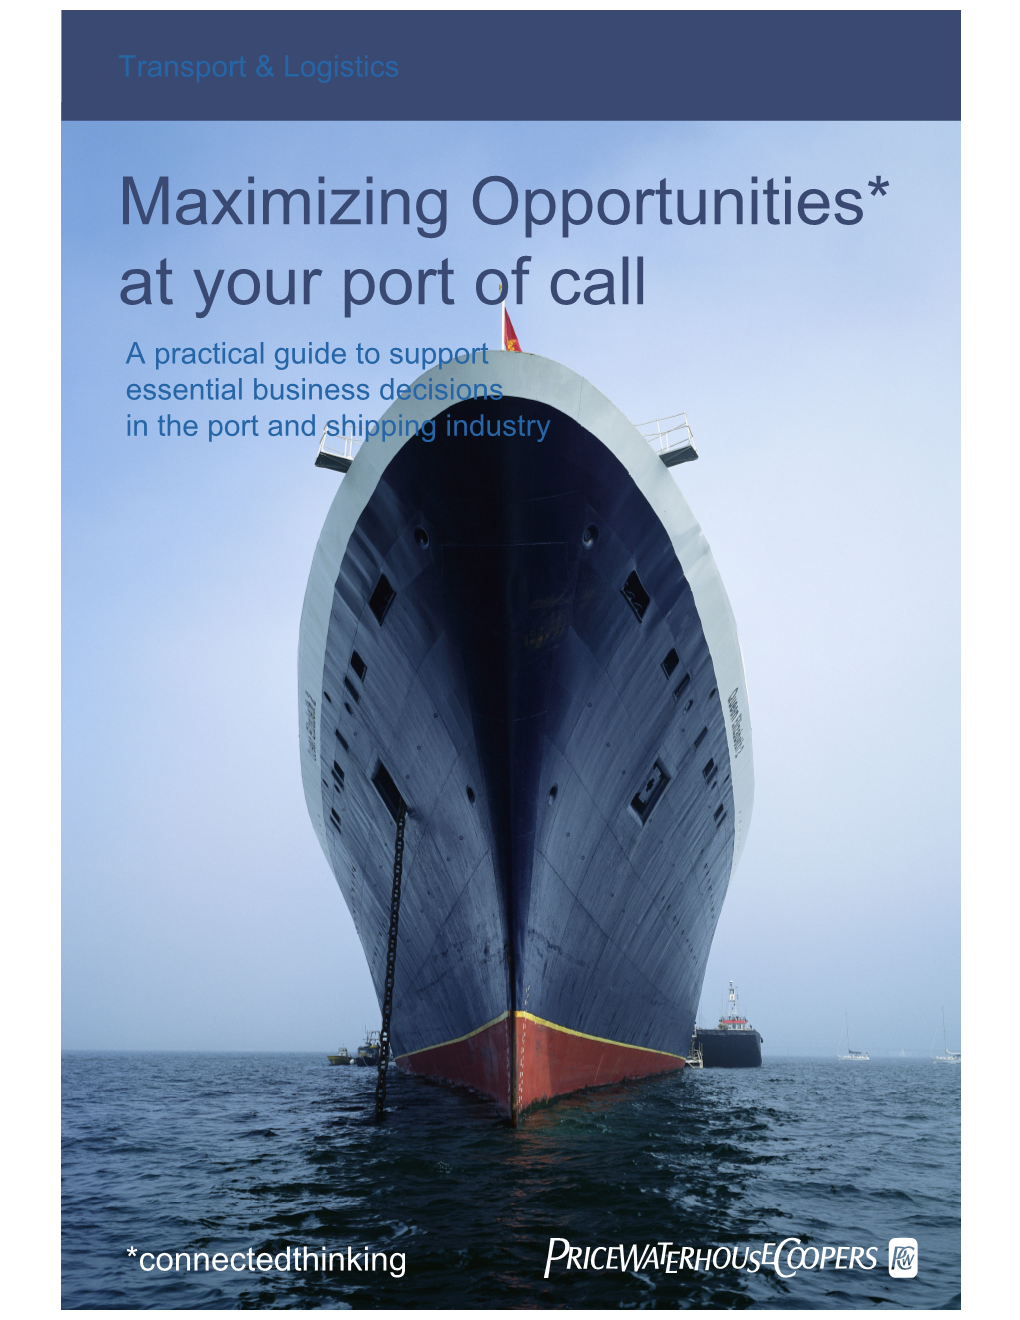 Maximizing Opportunities* at Your Port of Call a Practical Guide to Support Essential Business Decisions in the Port and Shipping Industry